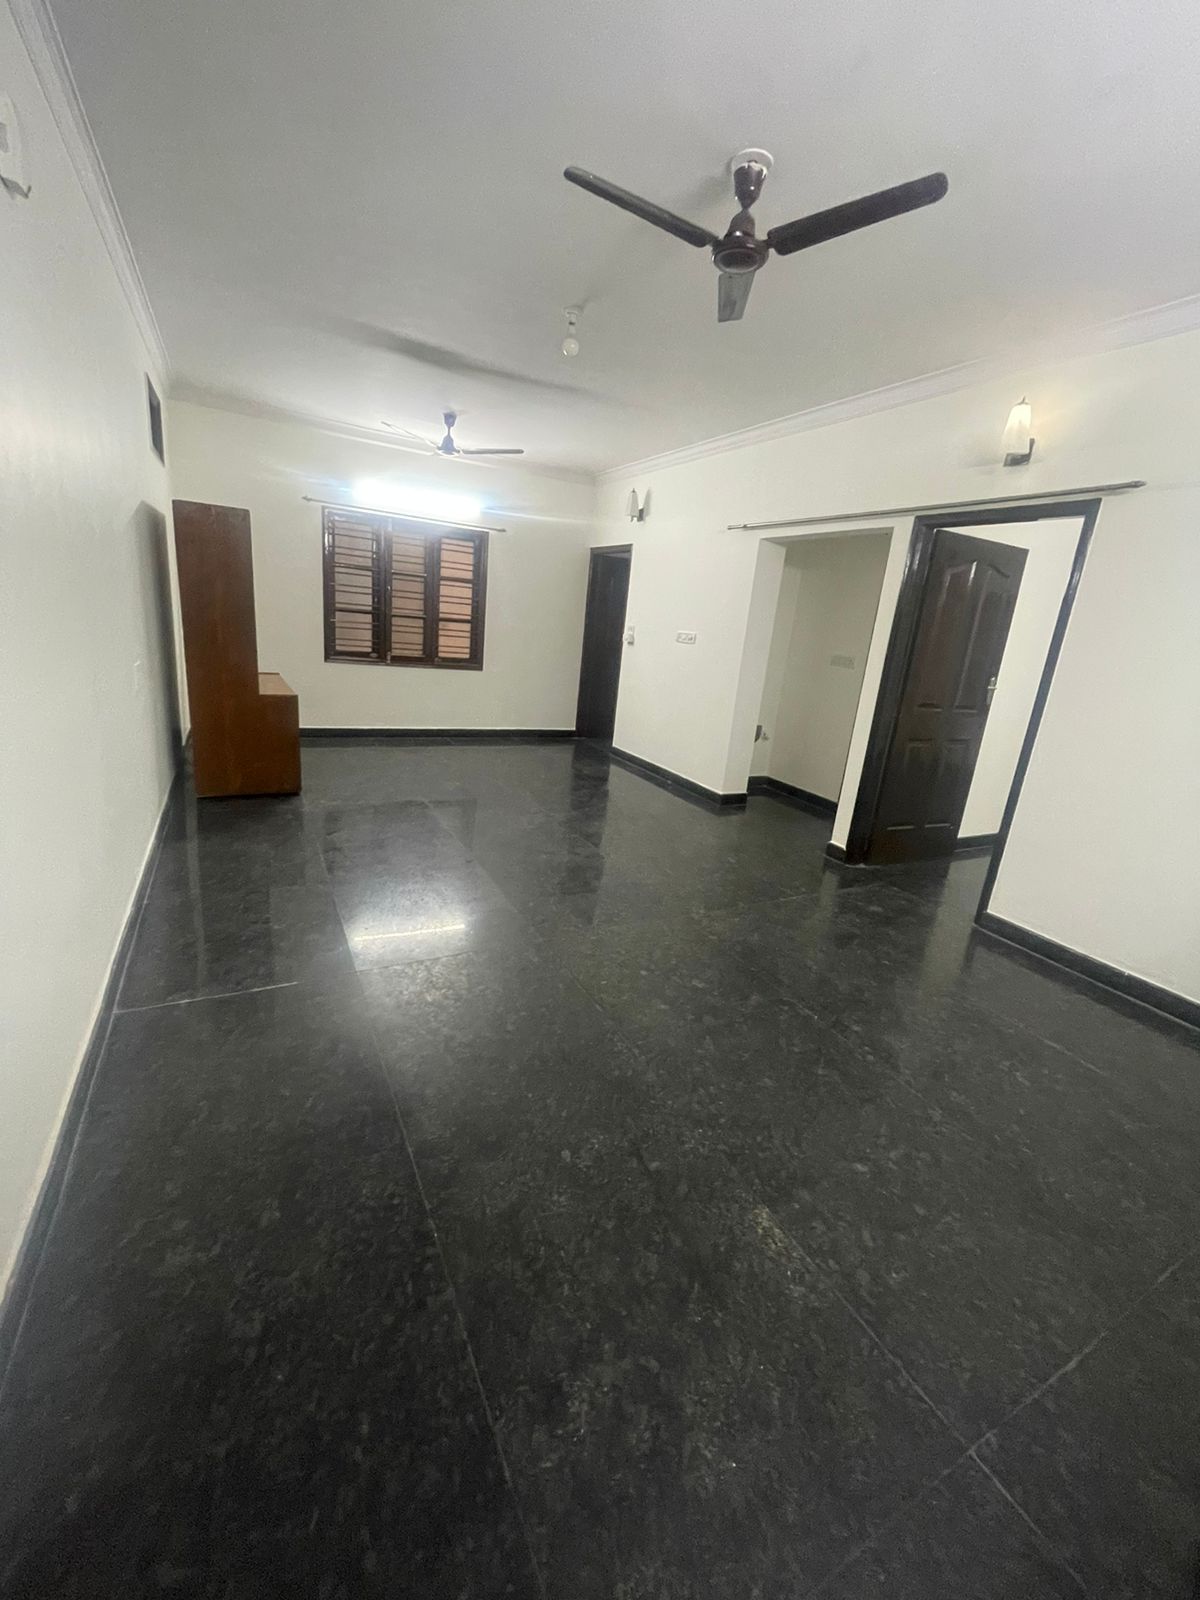 2 BHK Independent House for Lease Only at JAML2 - 4177 in Hoodi